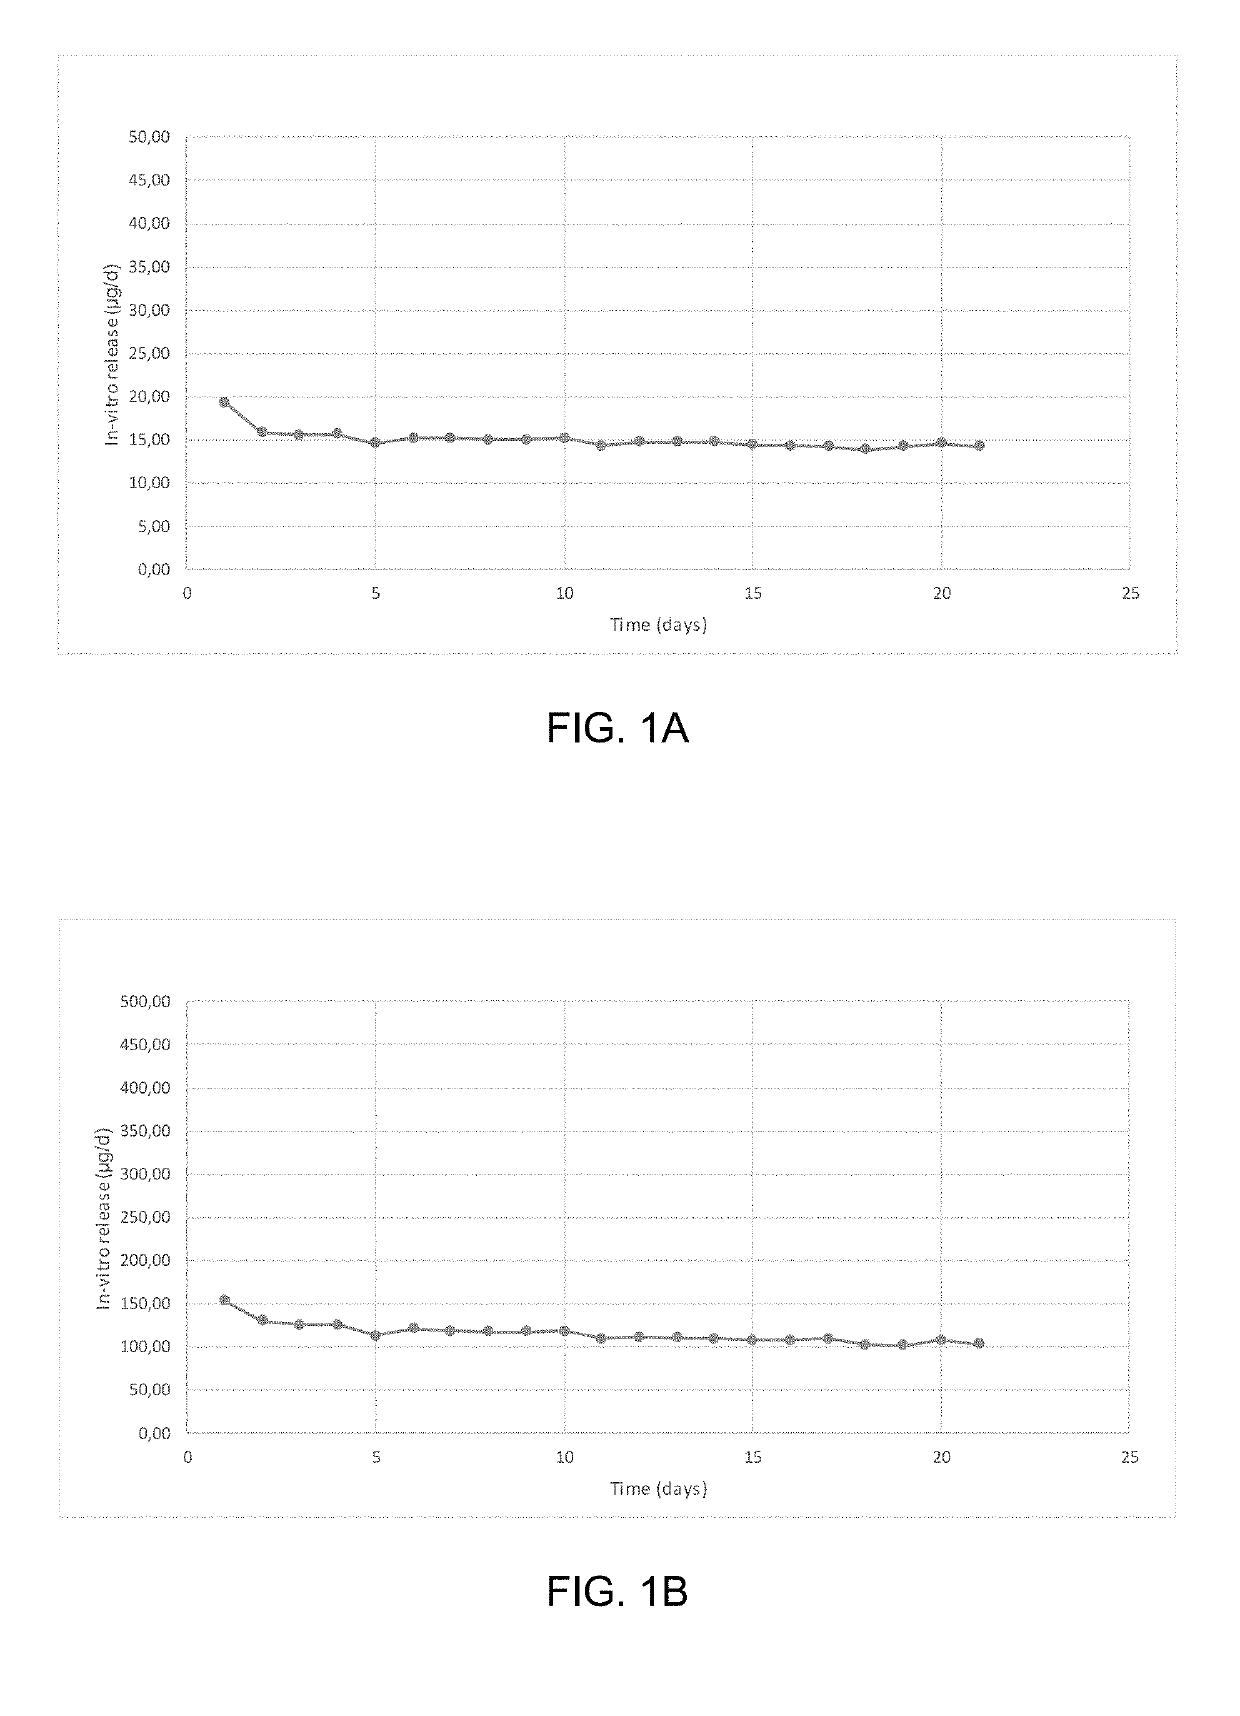 Targeted delivery of progestins and estrogens via vaginal ring devices for fertility control and hrt products